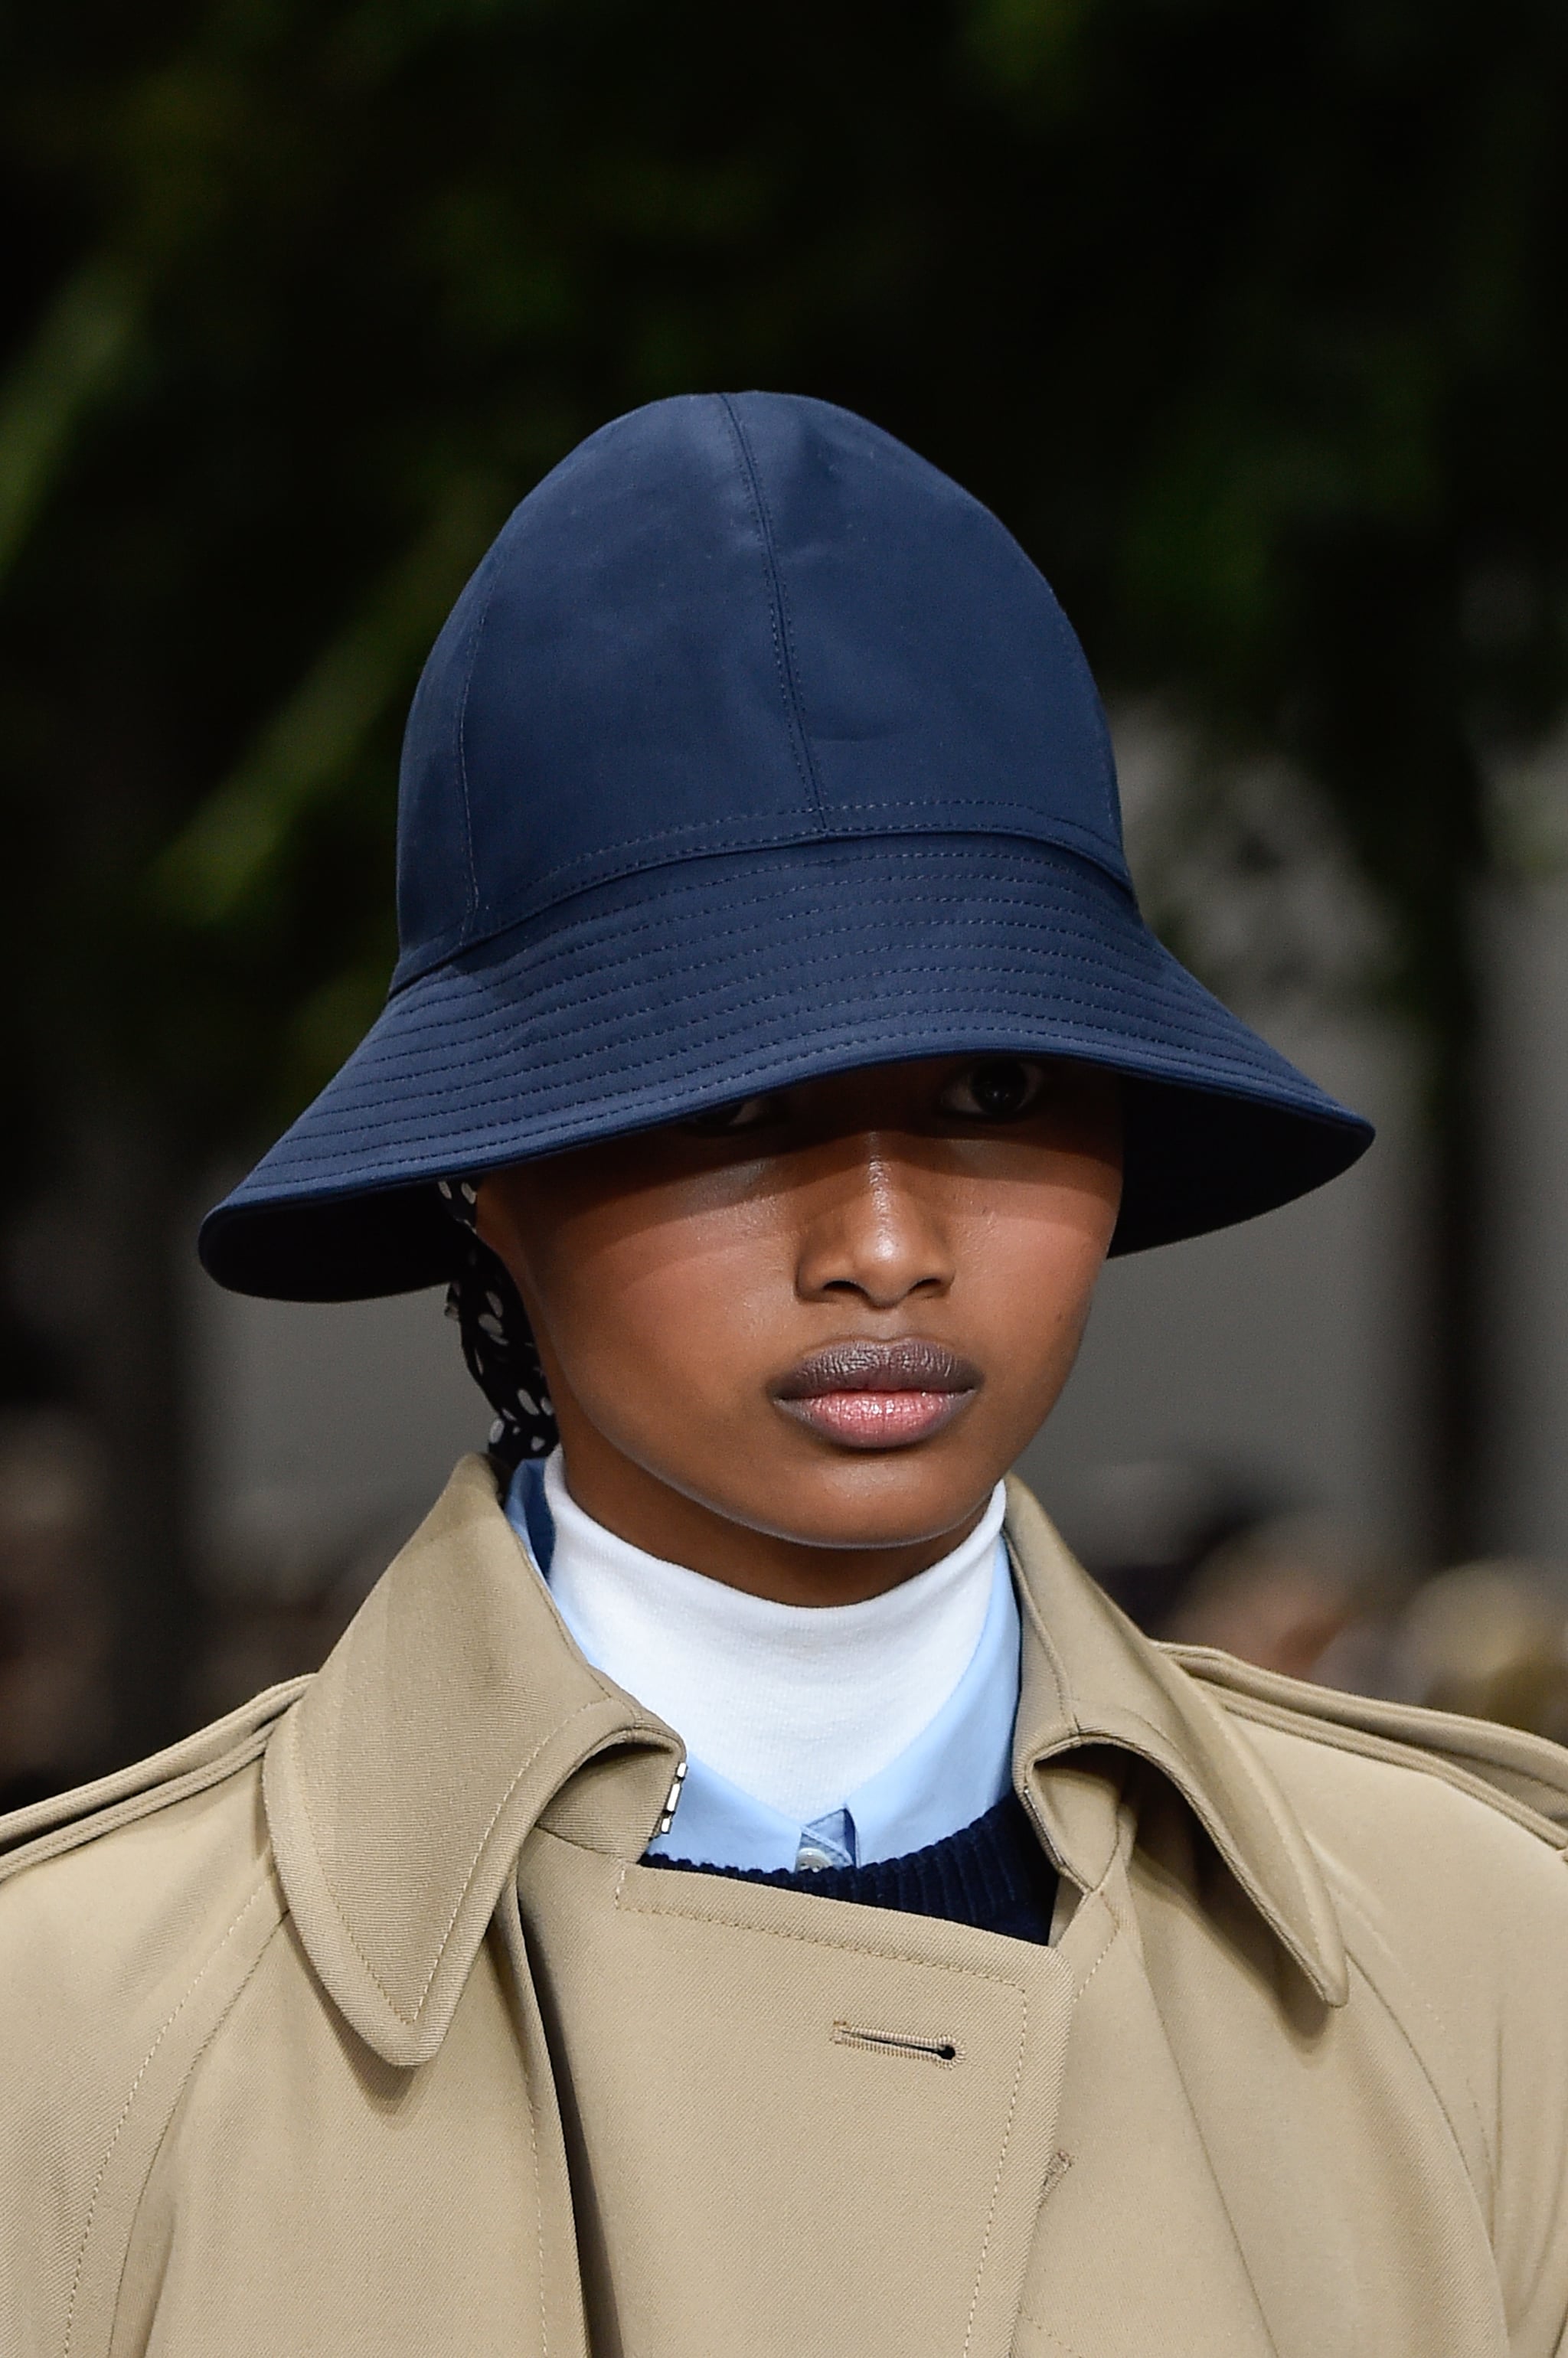 A Hat on the Michael Kors Collection Runway During New York Fashion Week |  The Spring Accessory Trends That Will Make Every Single Outfit Stand Out |  POPSUGAR Fashion Photo 28